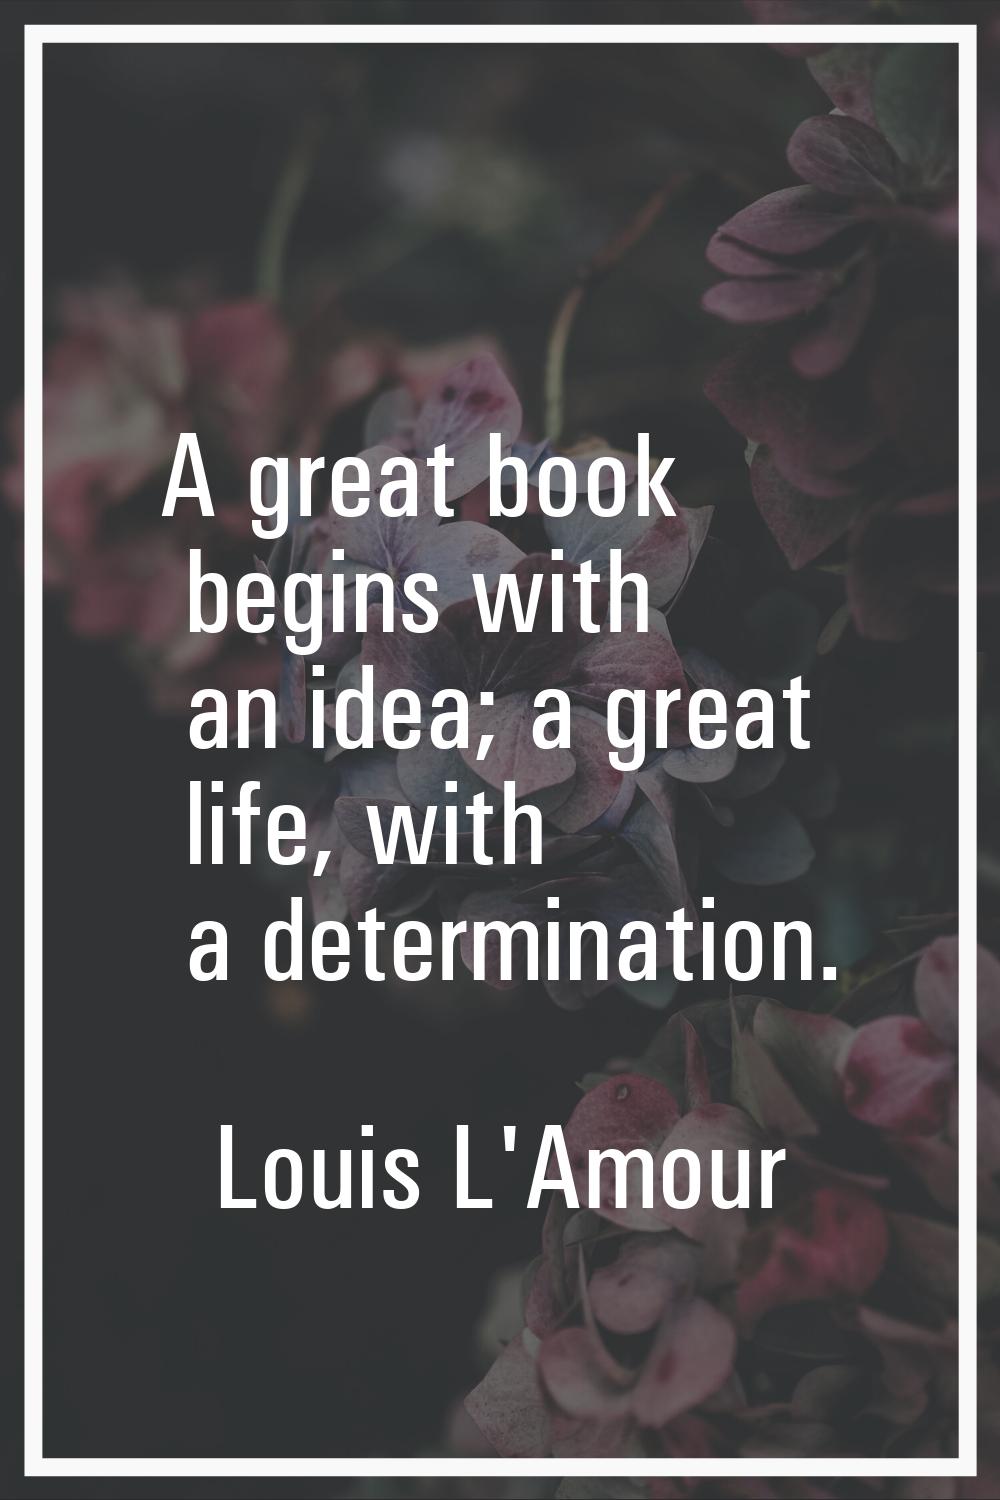 A great book begins with an idea; a great life, with a determination.